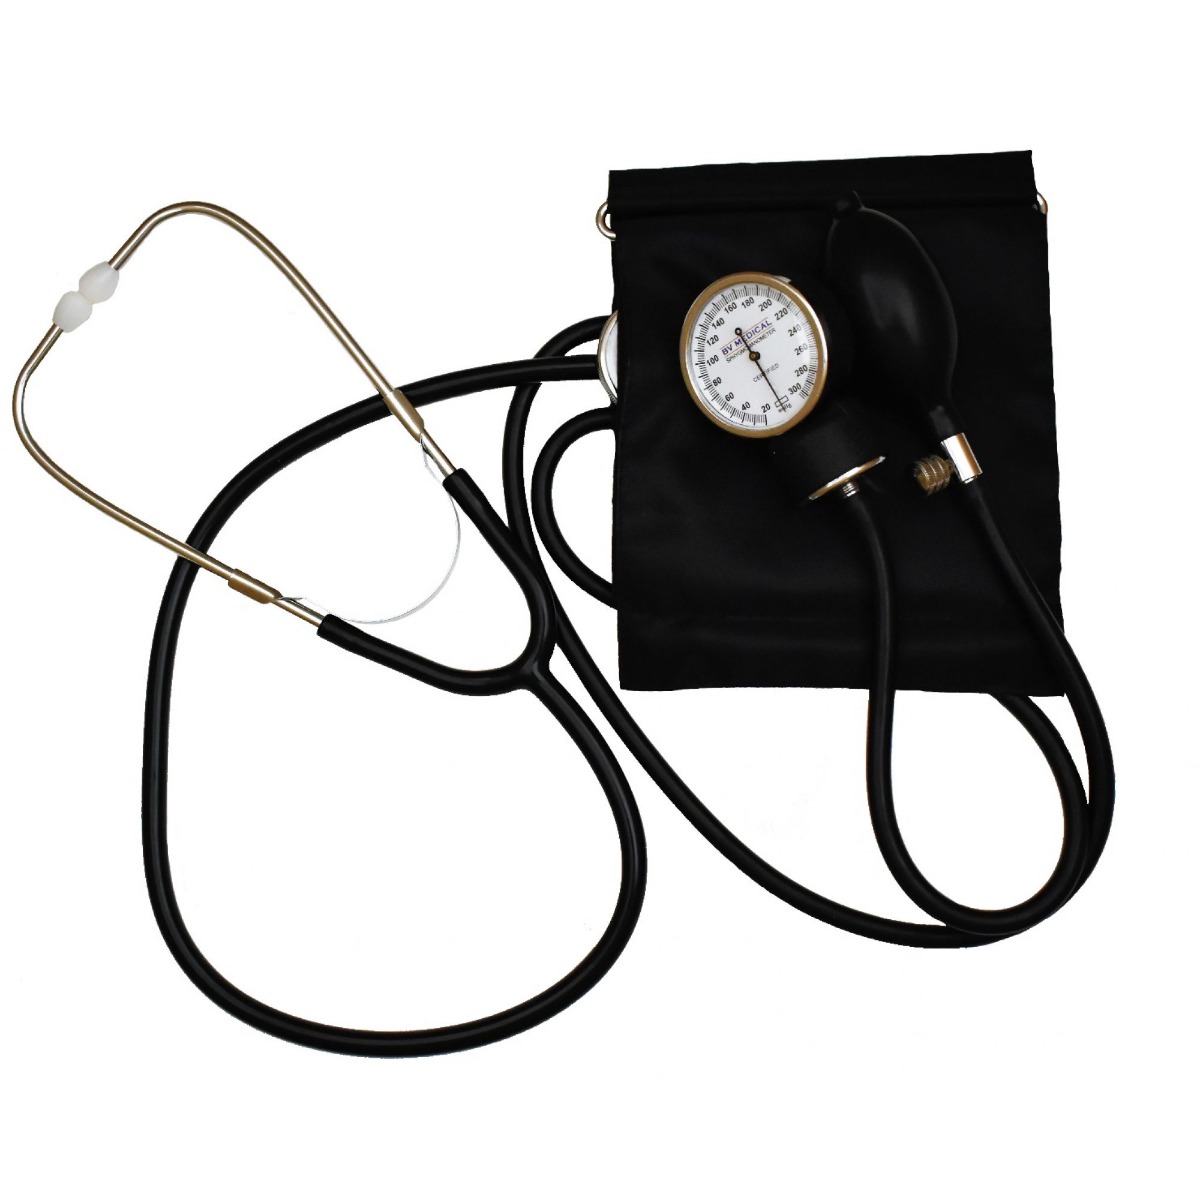 Self-taking blood pressure kit by BV Medical with professional stethoscope attached to cuff